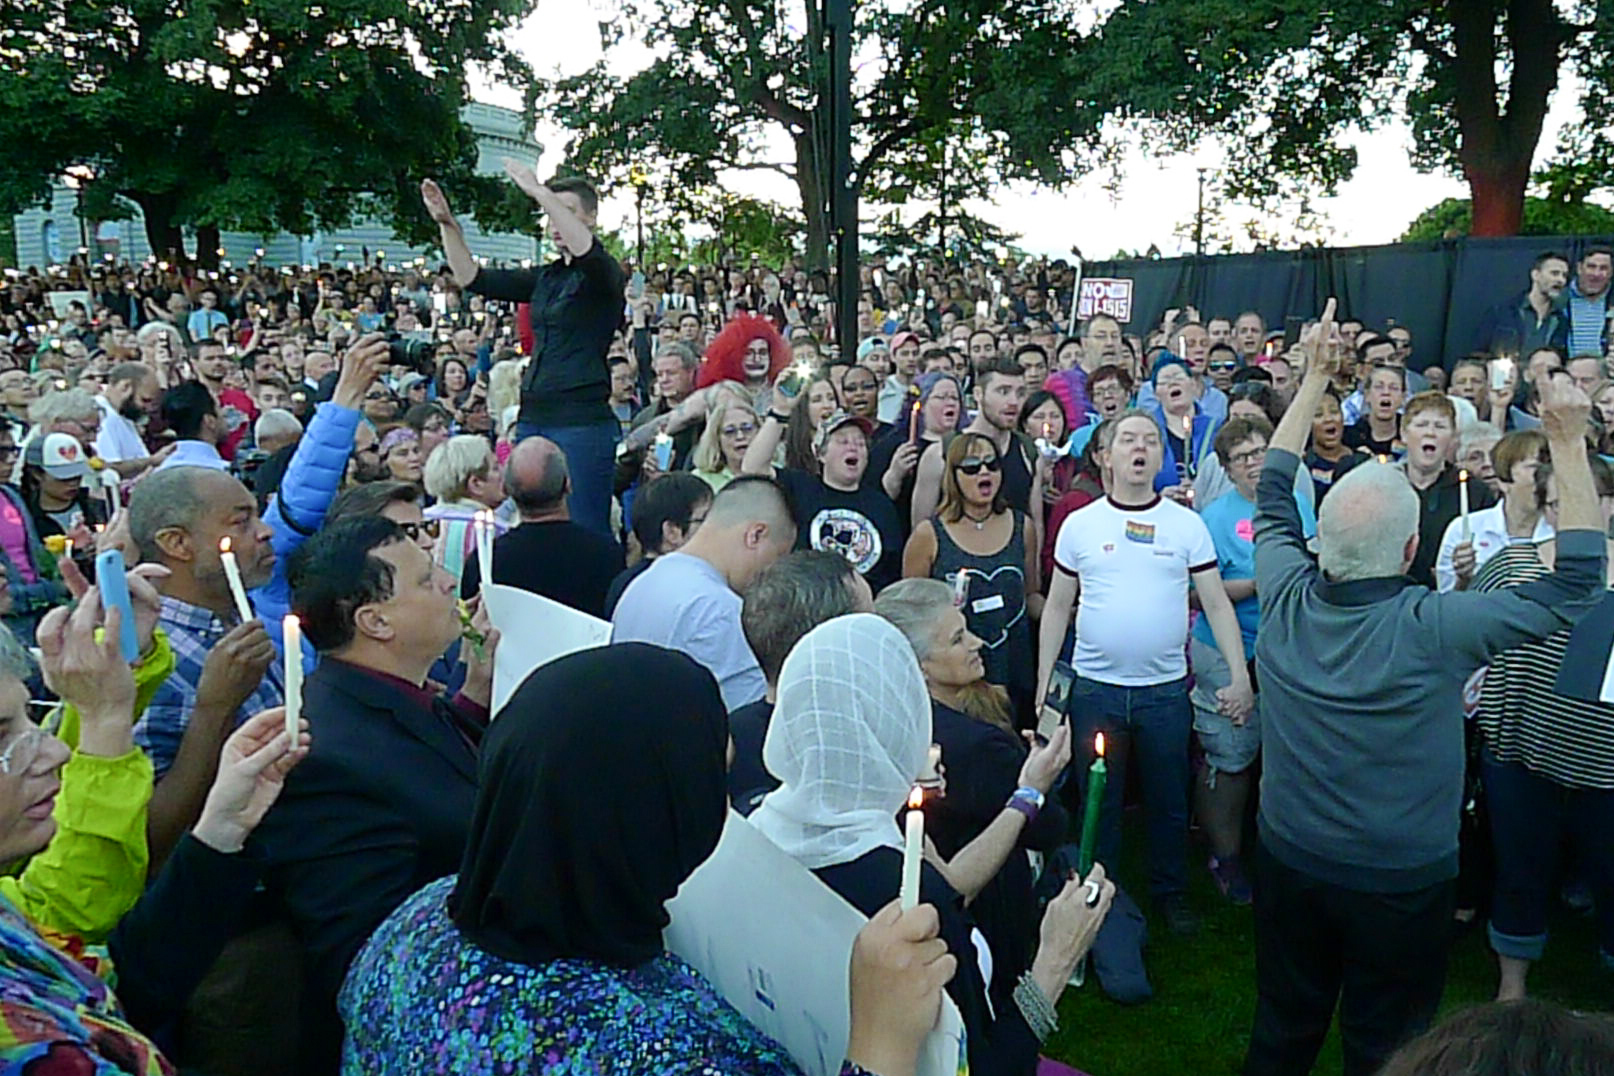 Words of Loss and Love Fill Cal Anderson Park During Vigil for Orlando Victims